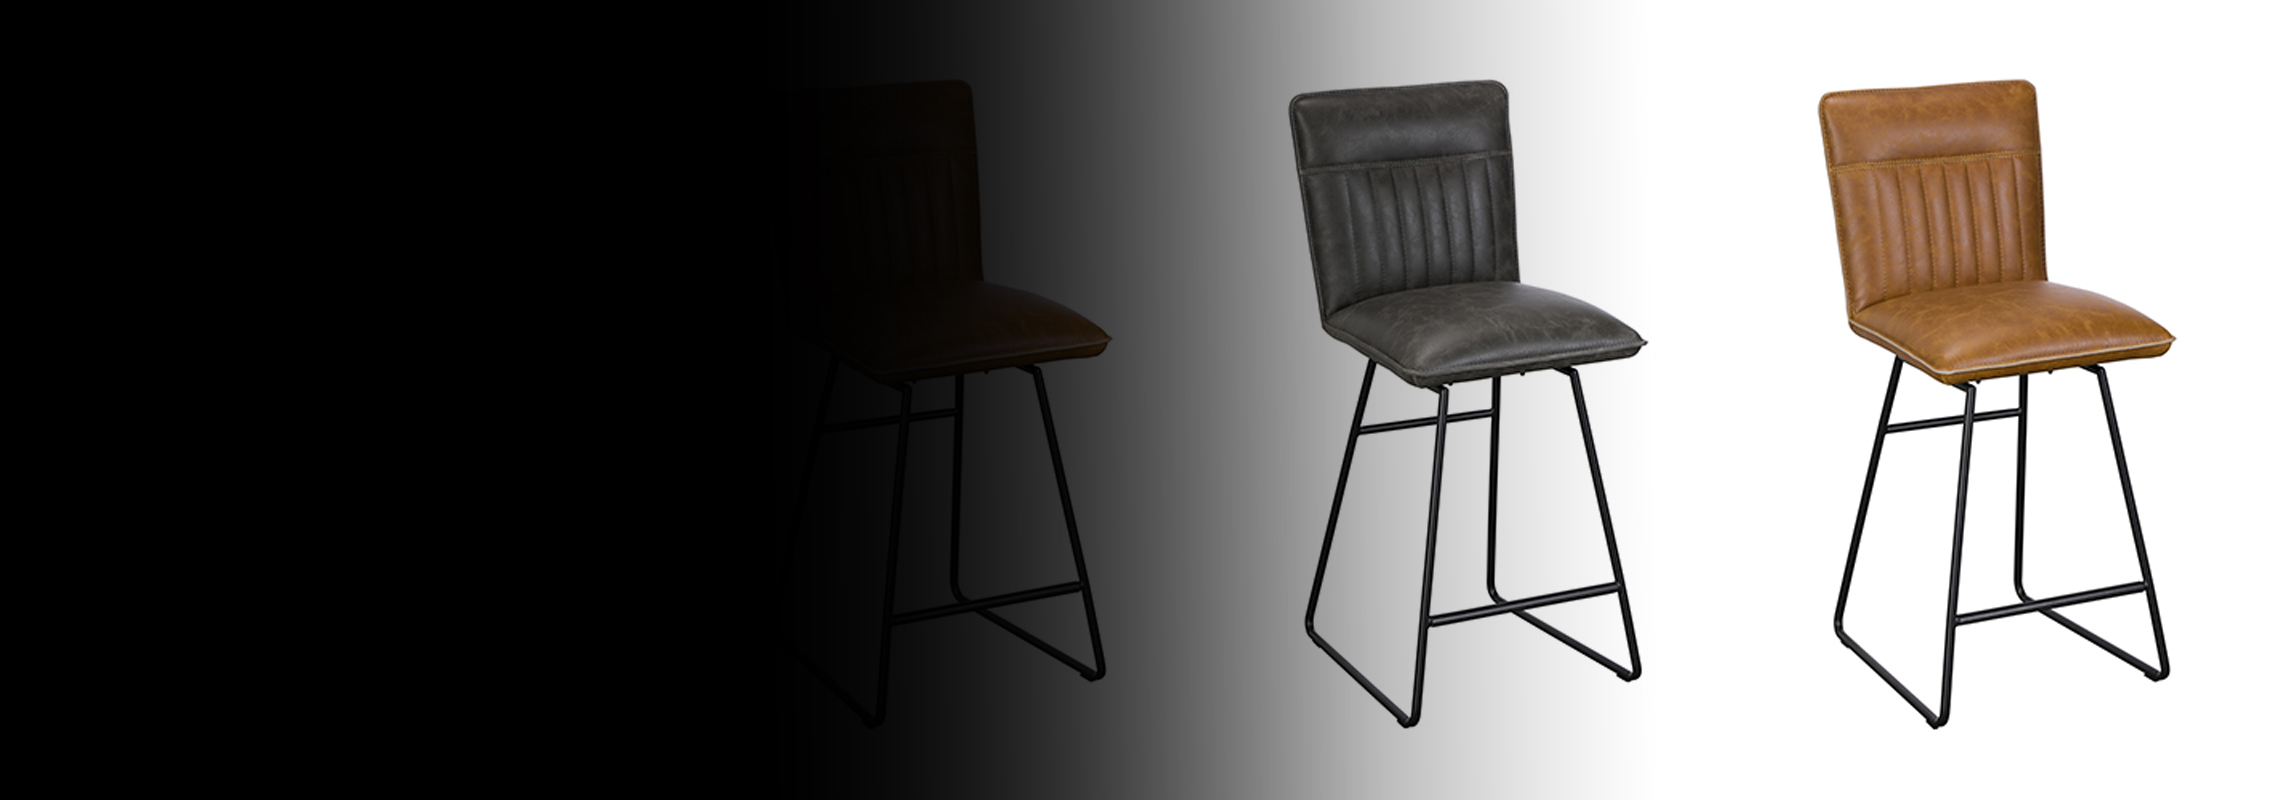 Baker Furniture Bar Chair Collection